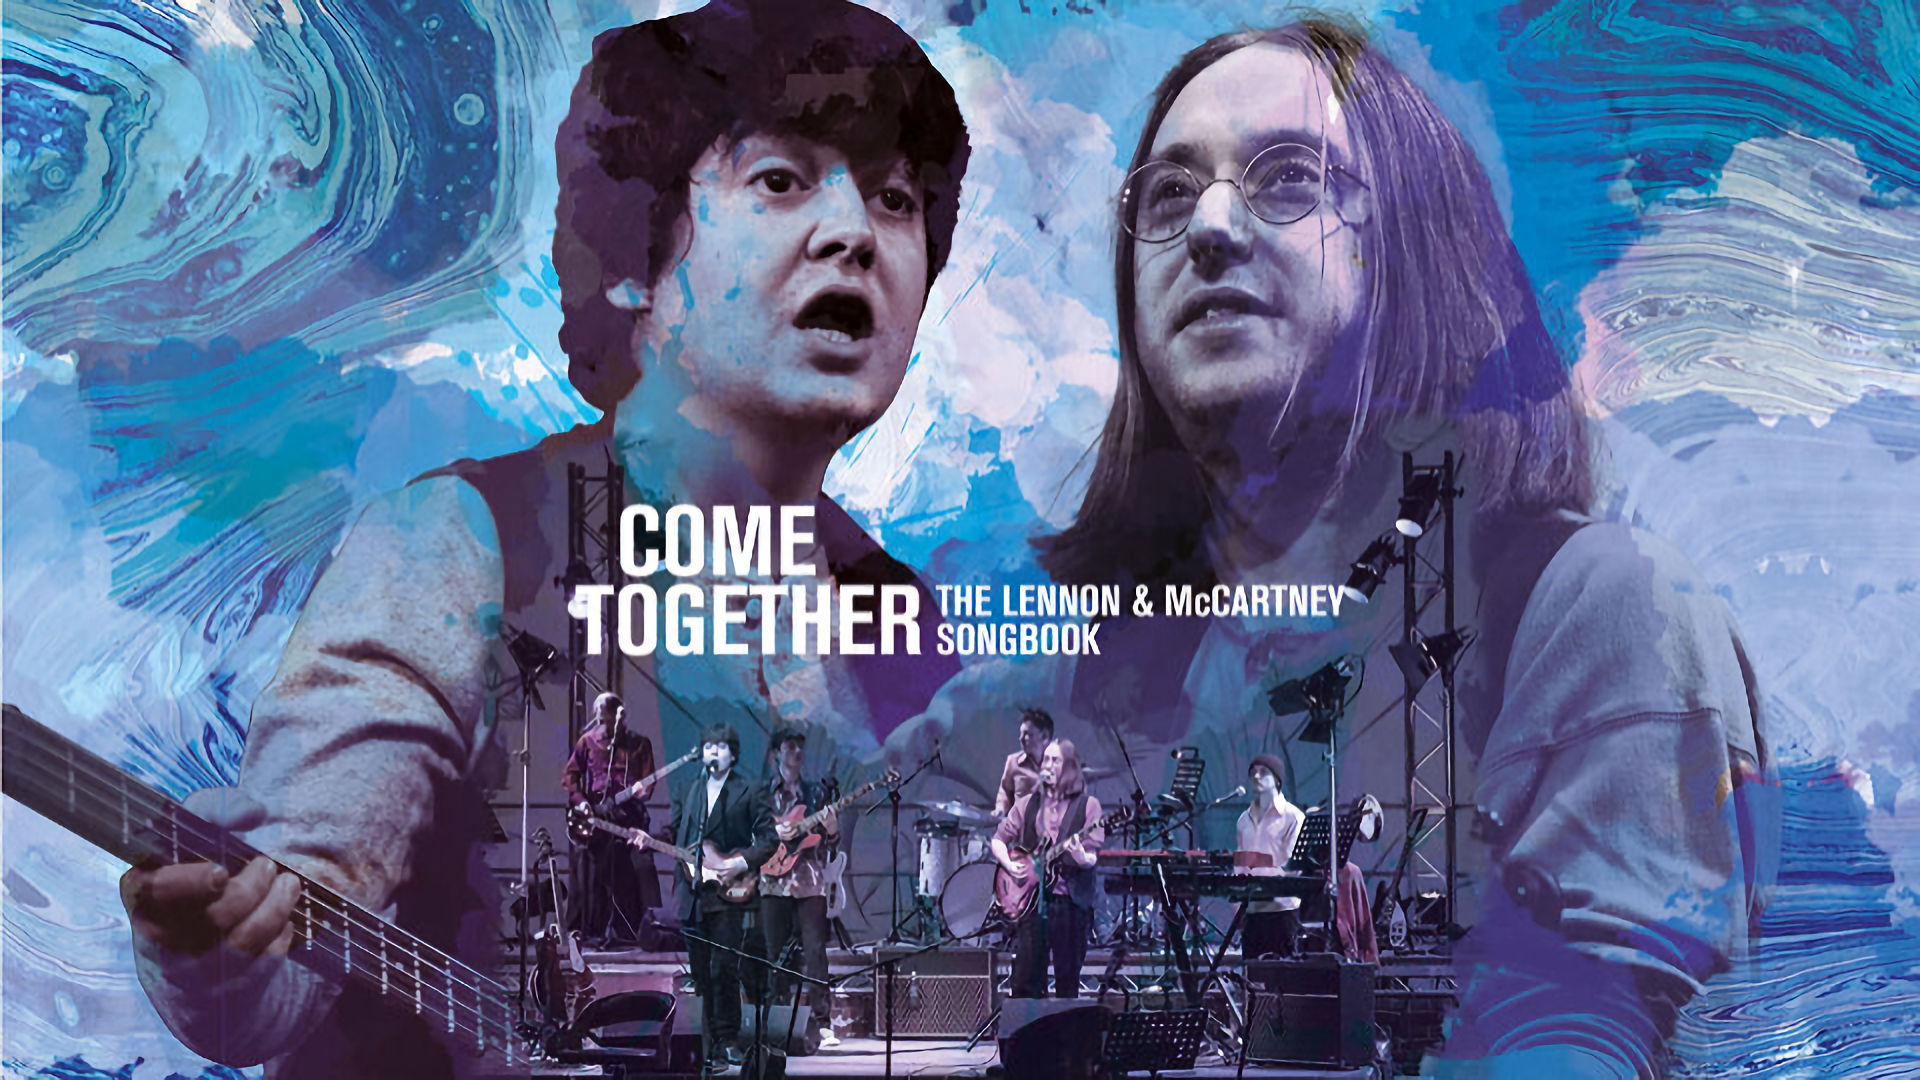 Come Together - The Lennon & McCartney Songbook